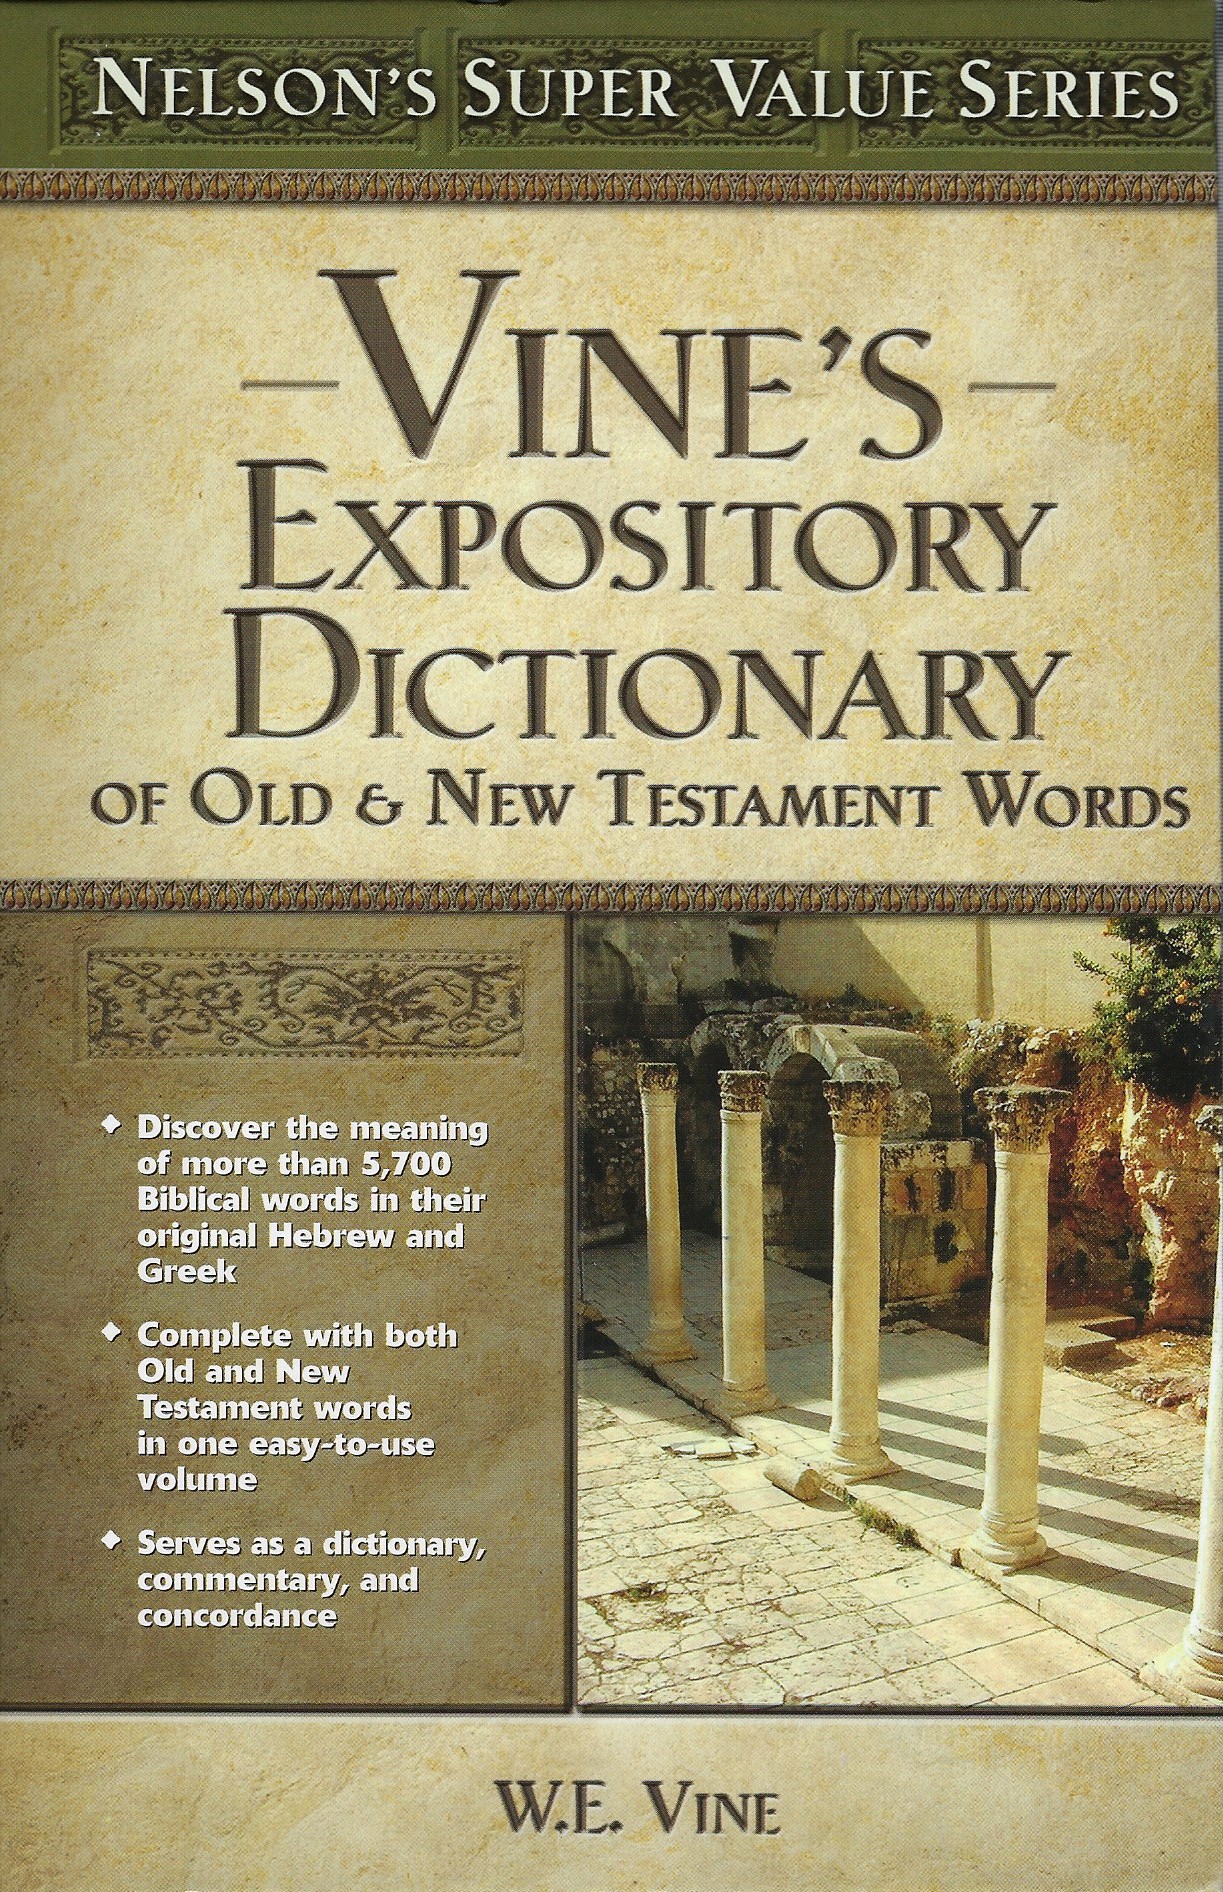 VINE'S EXPOSITORY DICTIONARY OF OLD & NEW TESTAMENT WORDS